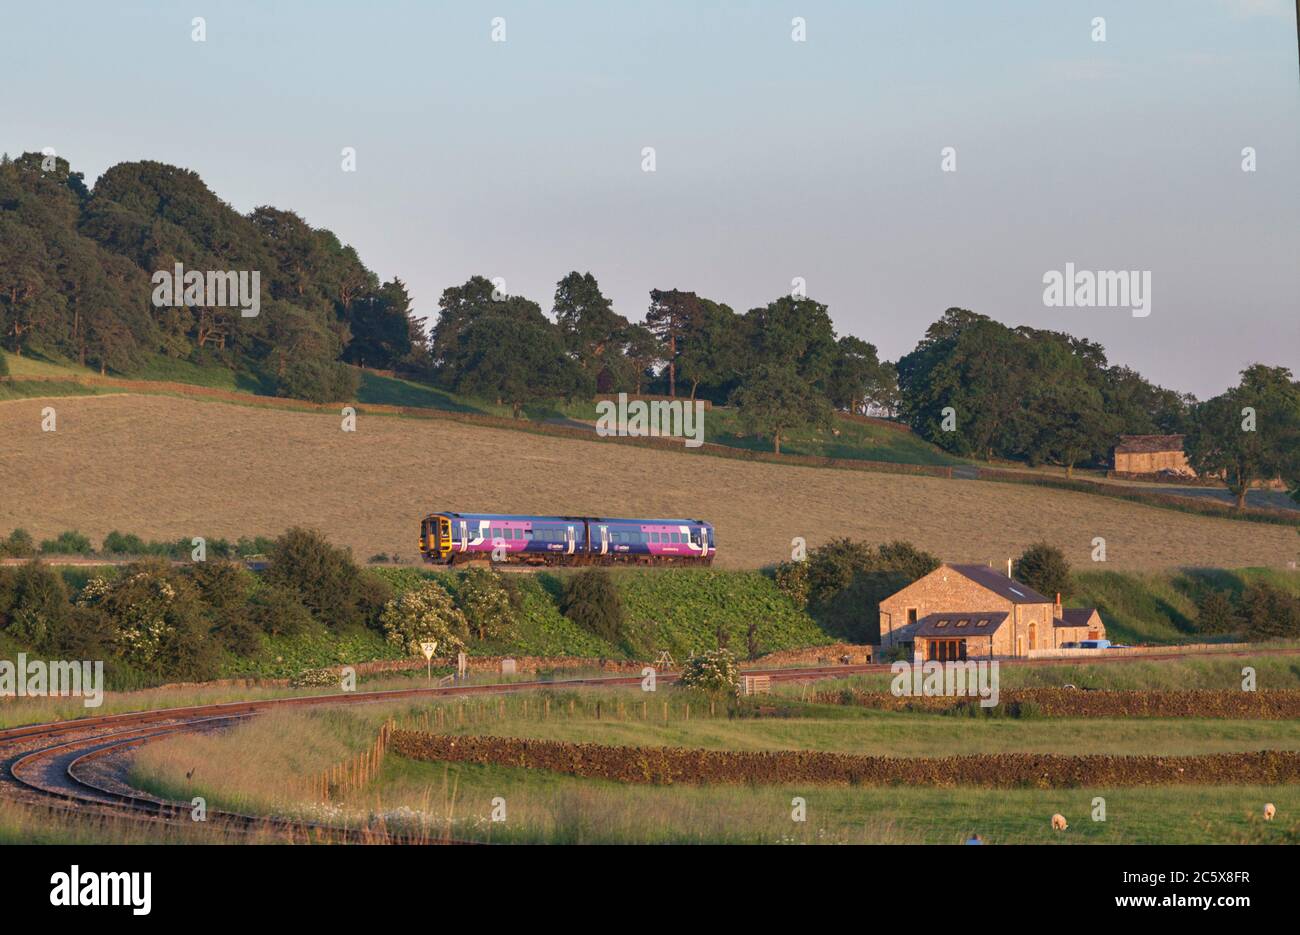 Northern rail class 158 sprinter train  in the countryside at Settle junction in the Yorkshire dales Stock Photo